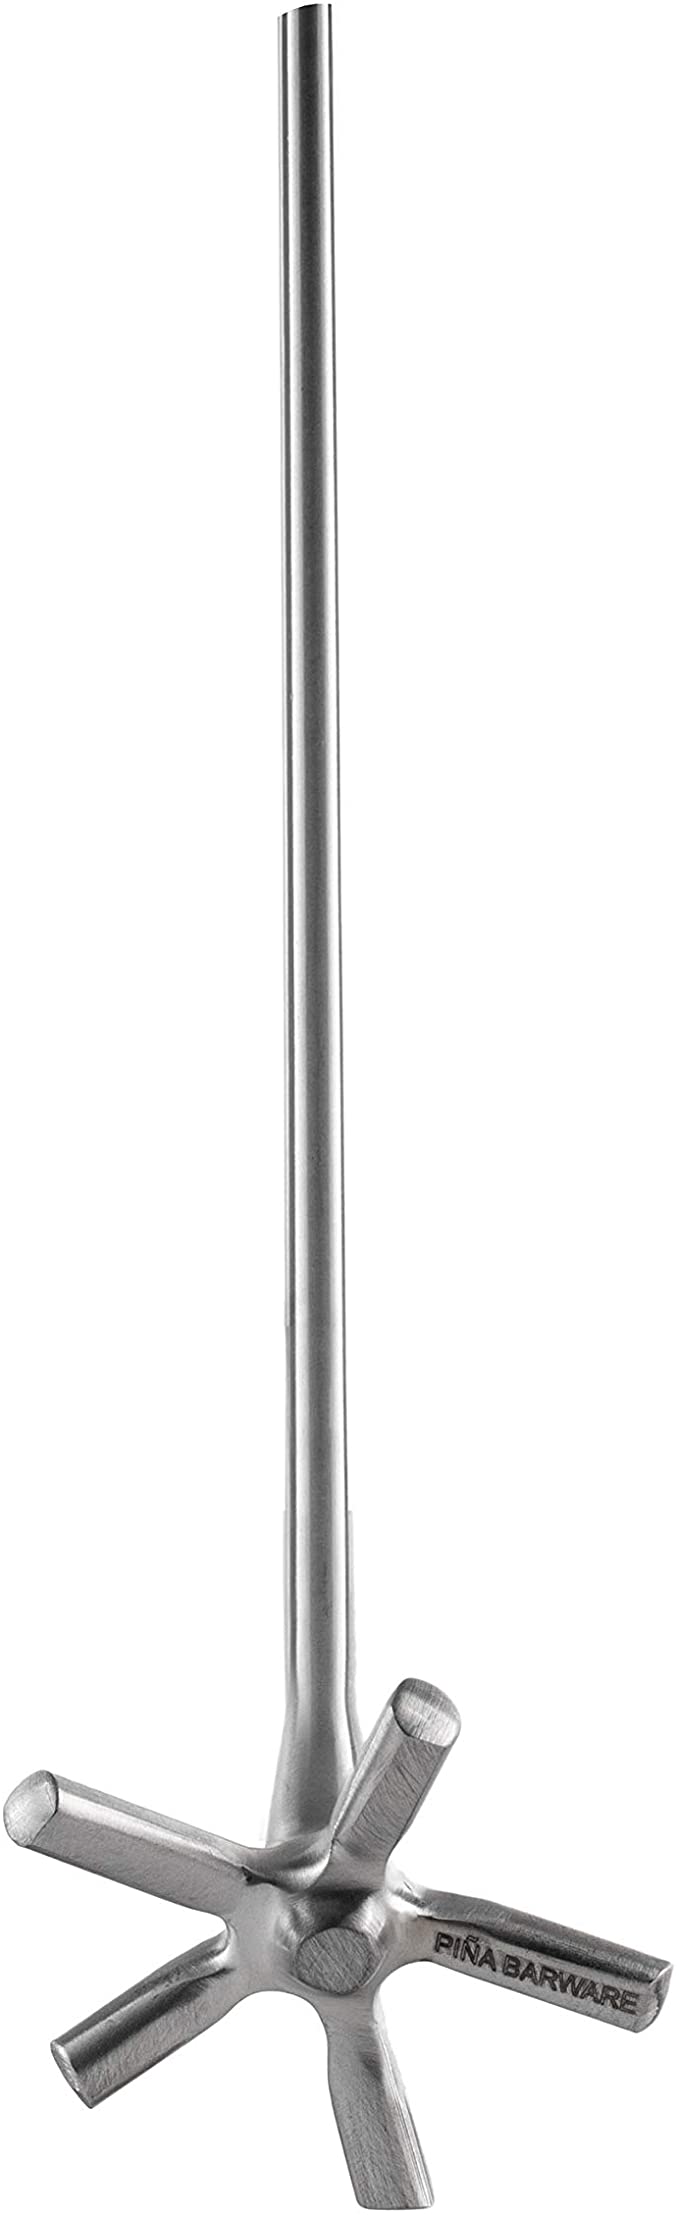 Piña Barware Swizzle Stick Stirrer - Stainless Steel with Smooth Matte Finish (One Swizzle Stick)